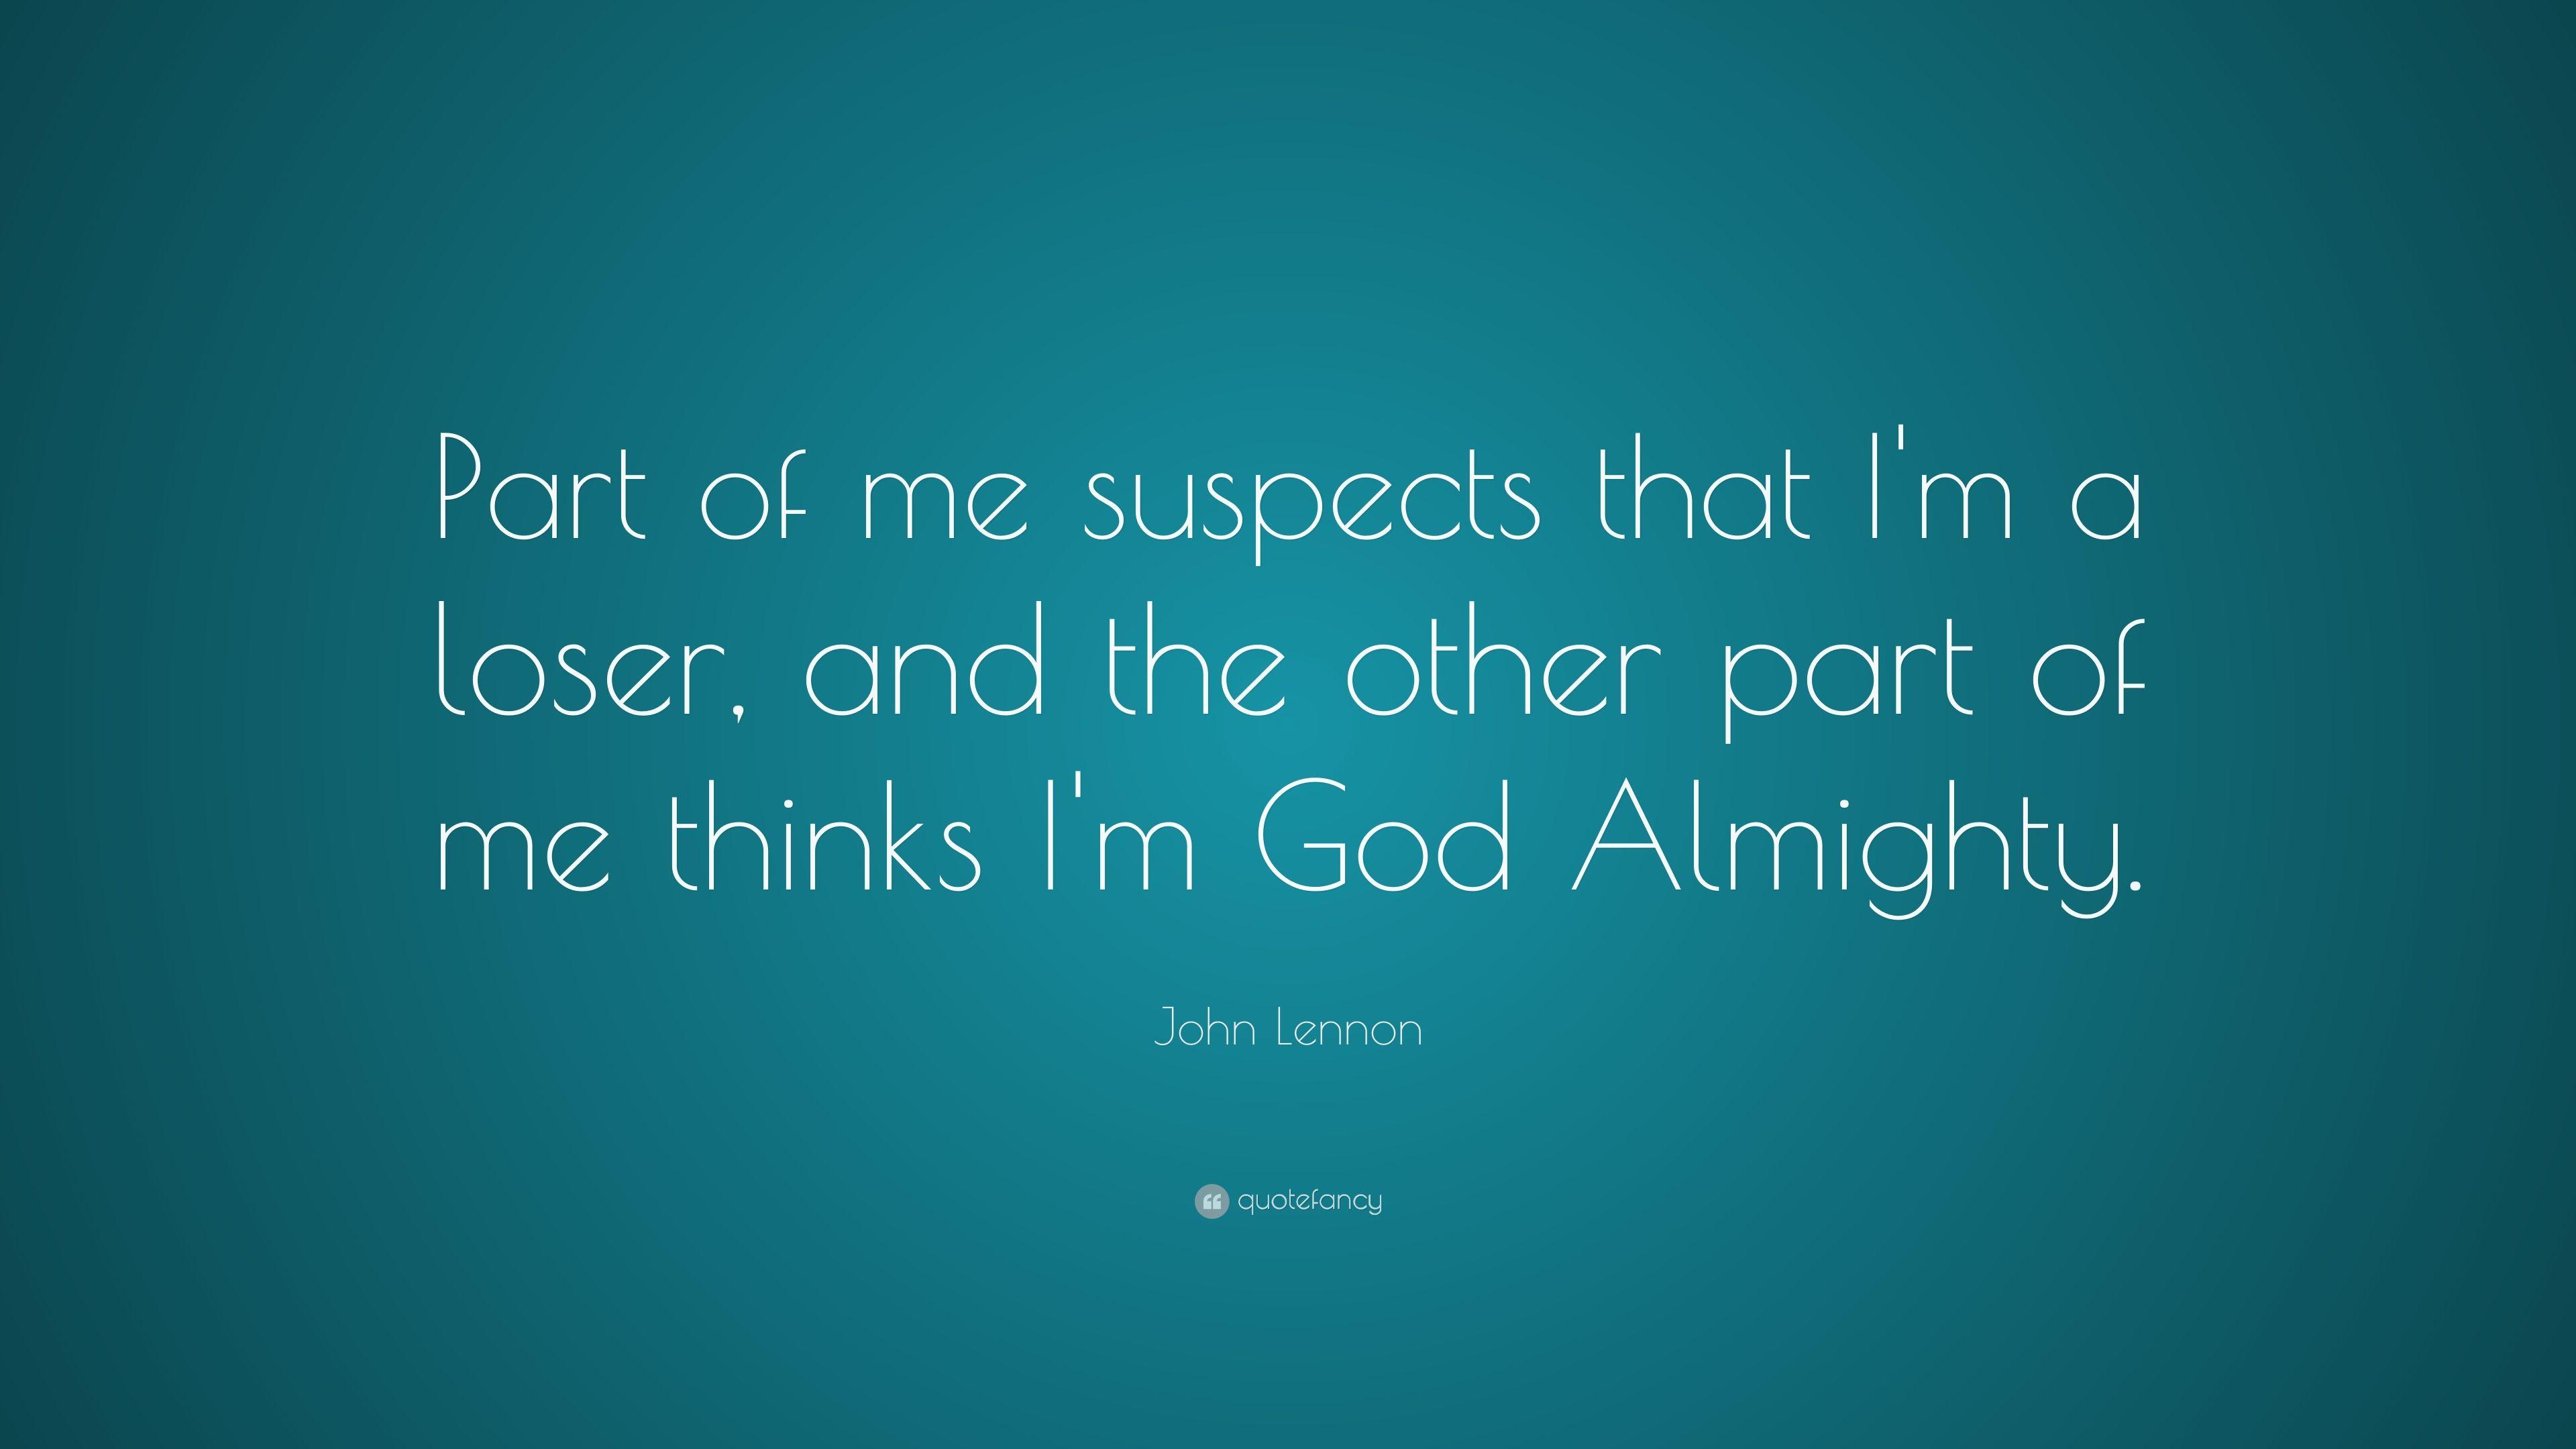 John Lennon Quote: “Part of me suspects that I'm a loser, and